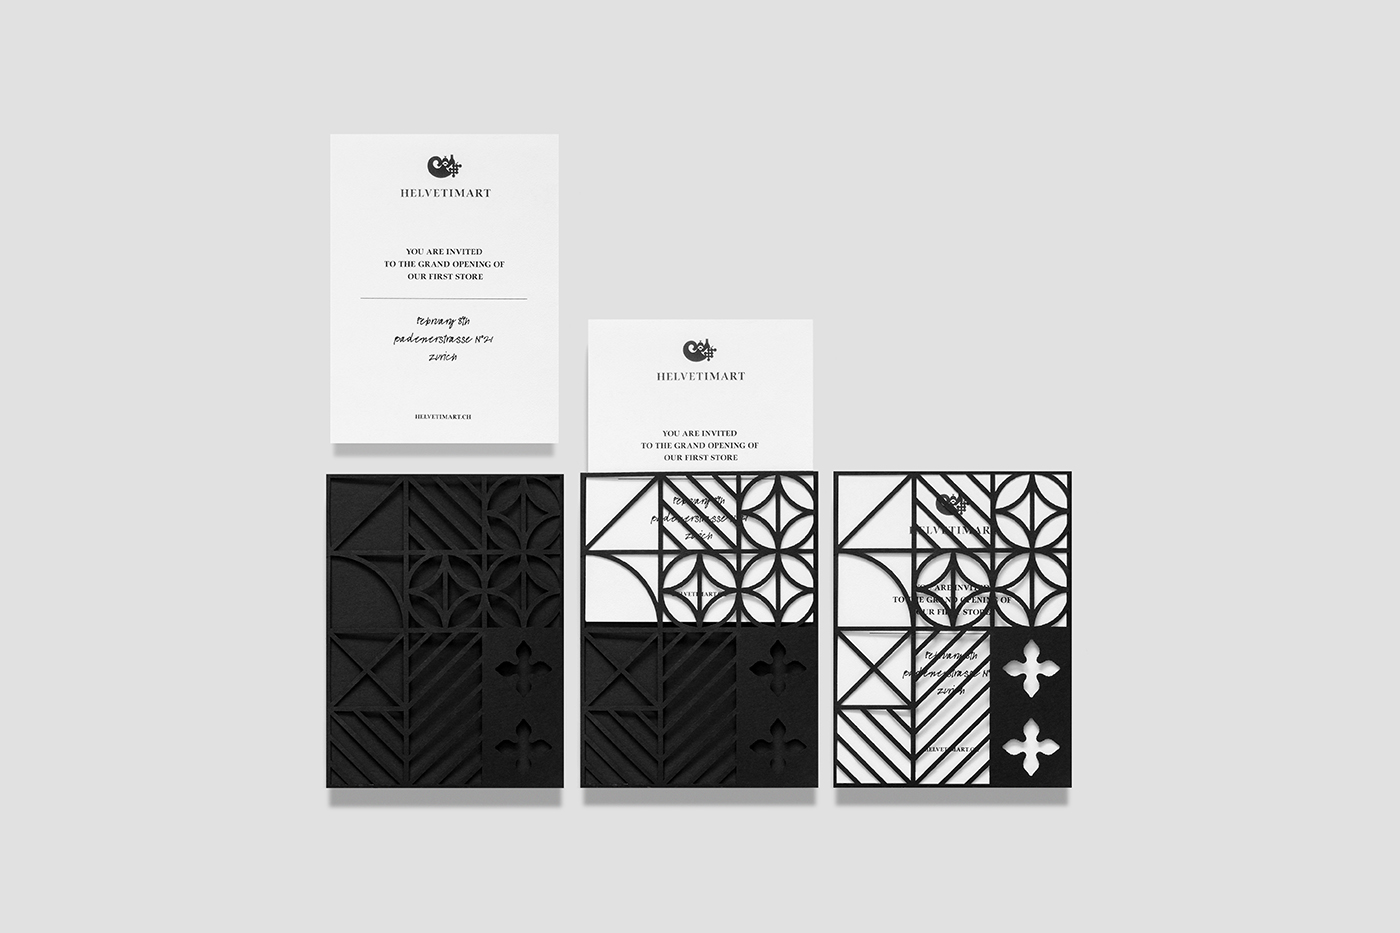 Brand identity and invitations by Anagrama for Lausanne-based independent food and speciality supermarket Helvetimart